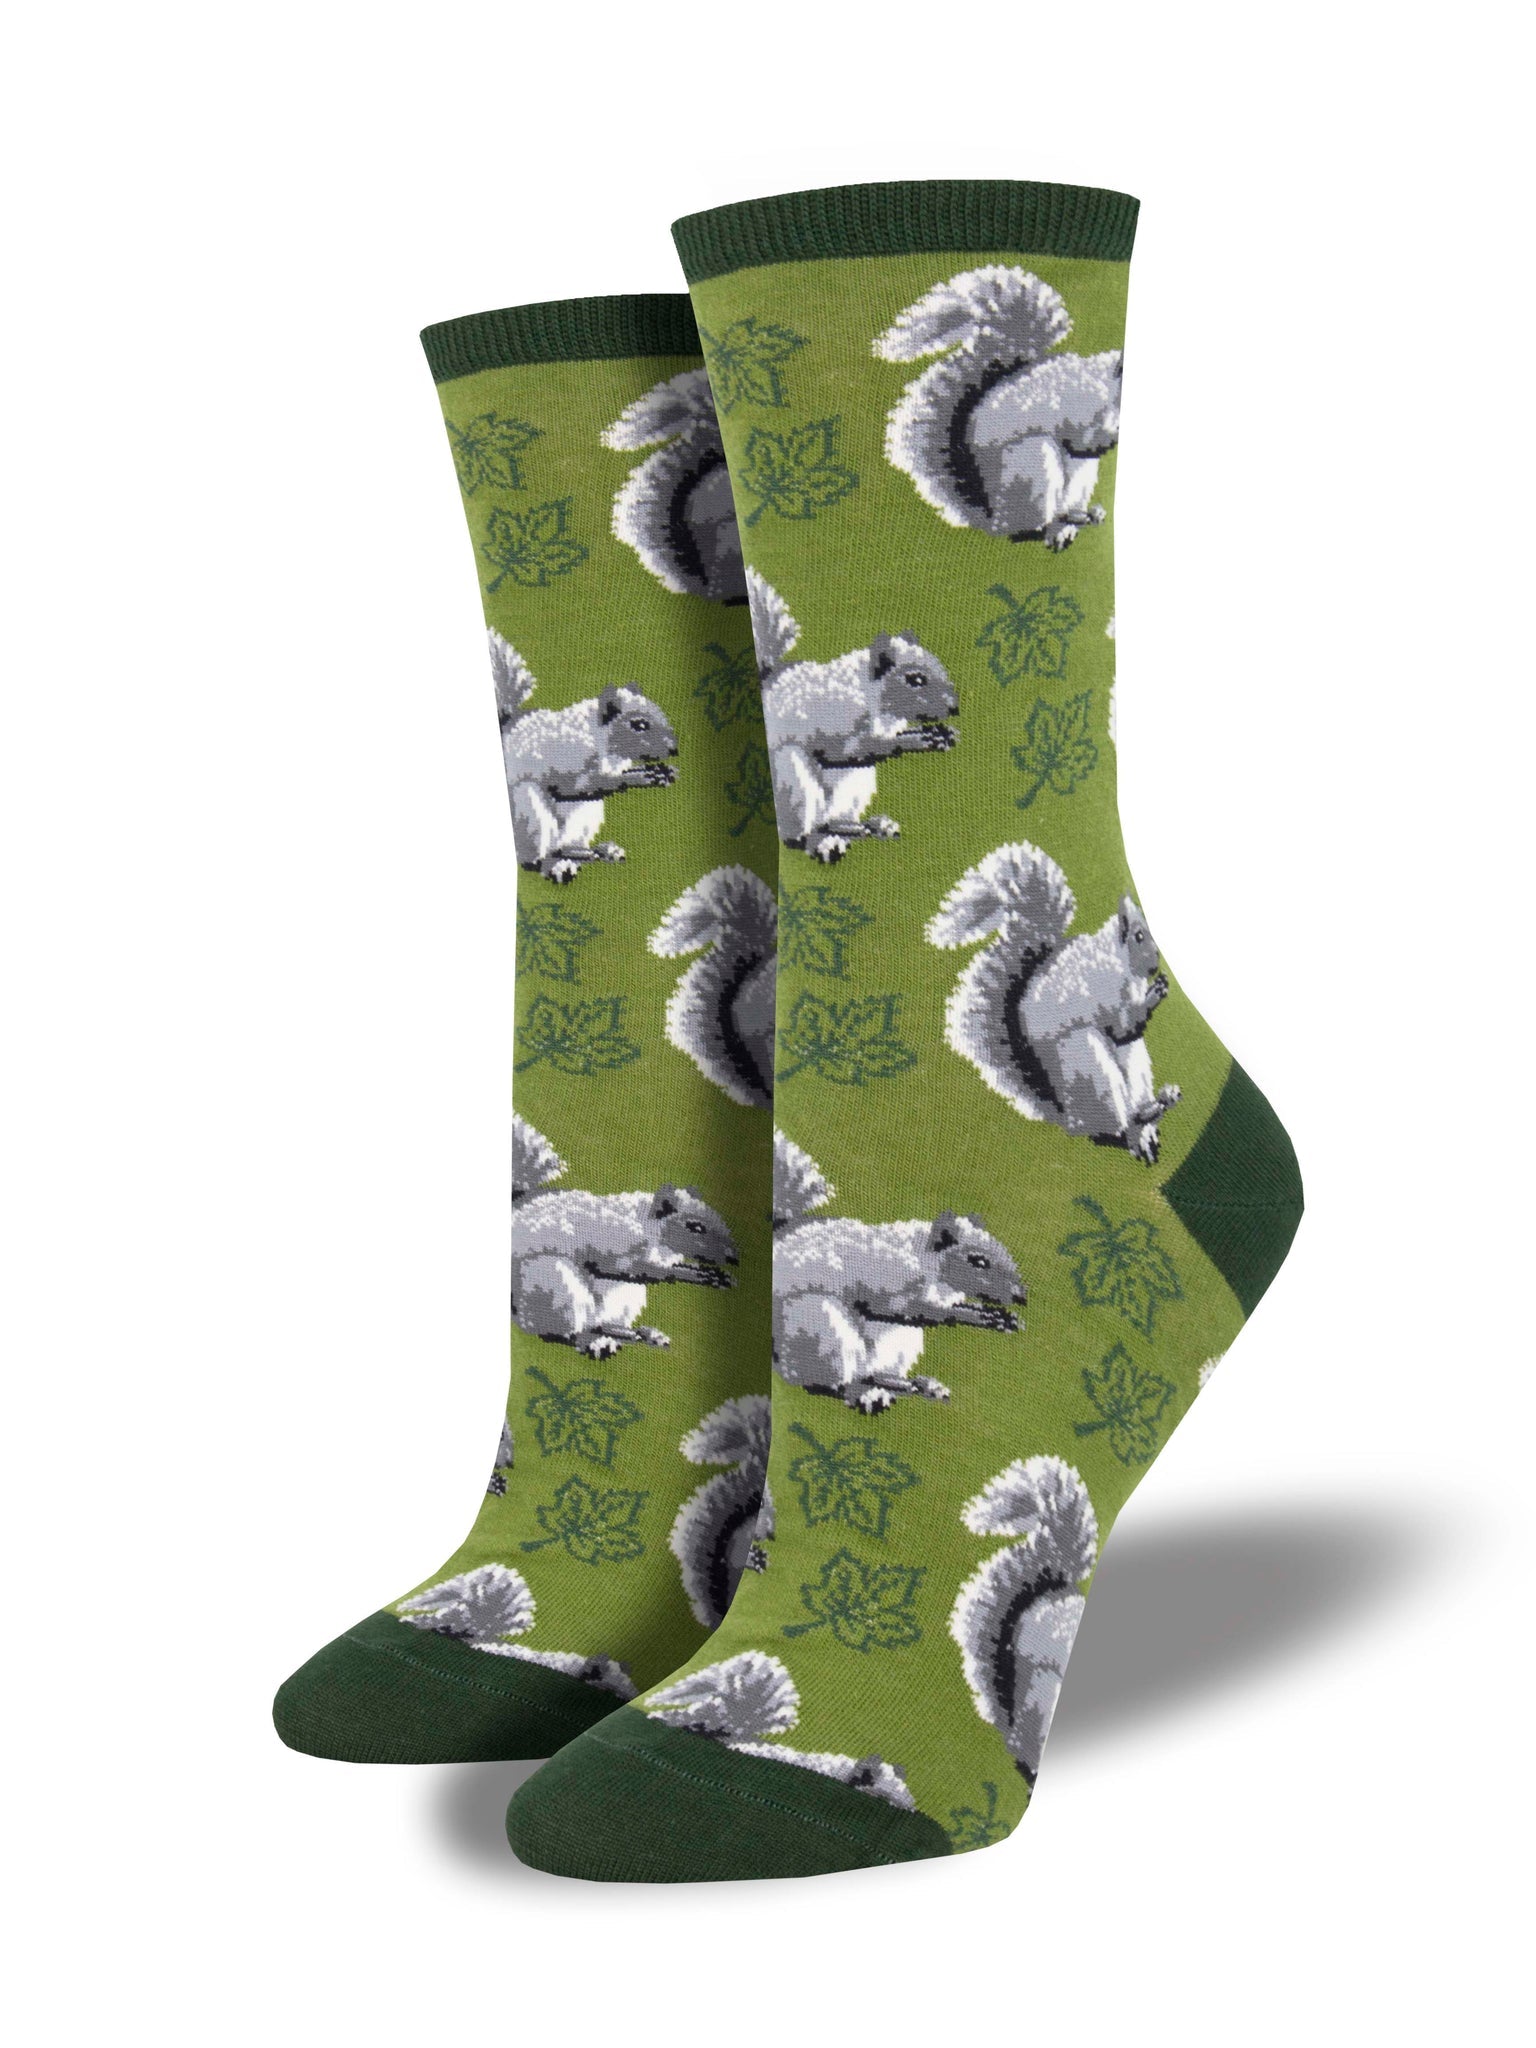 Women's Nuts About Fall Crew Socks